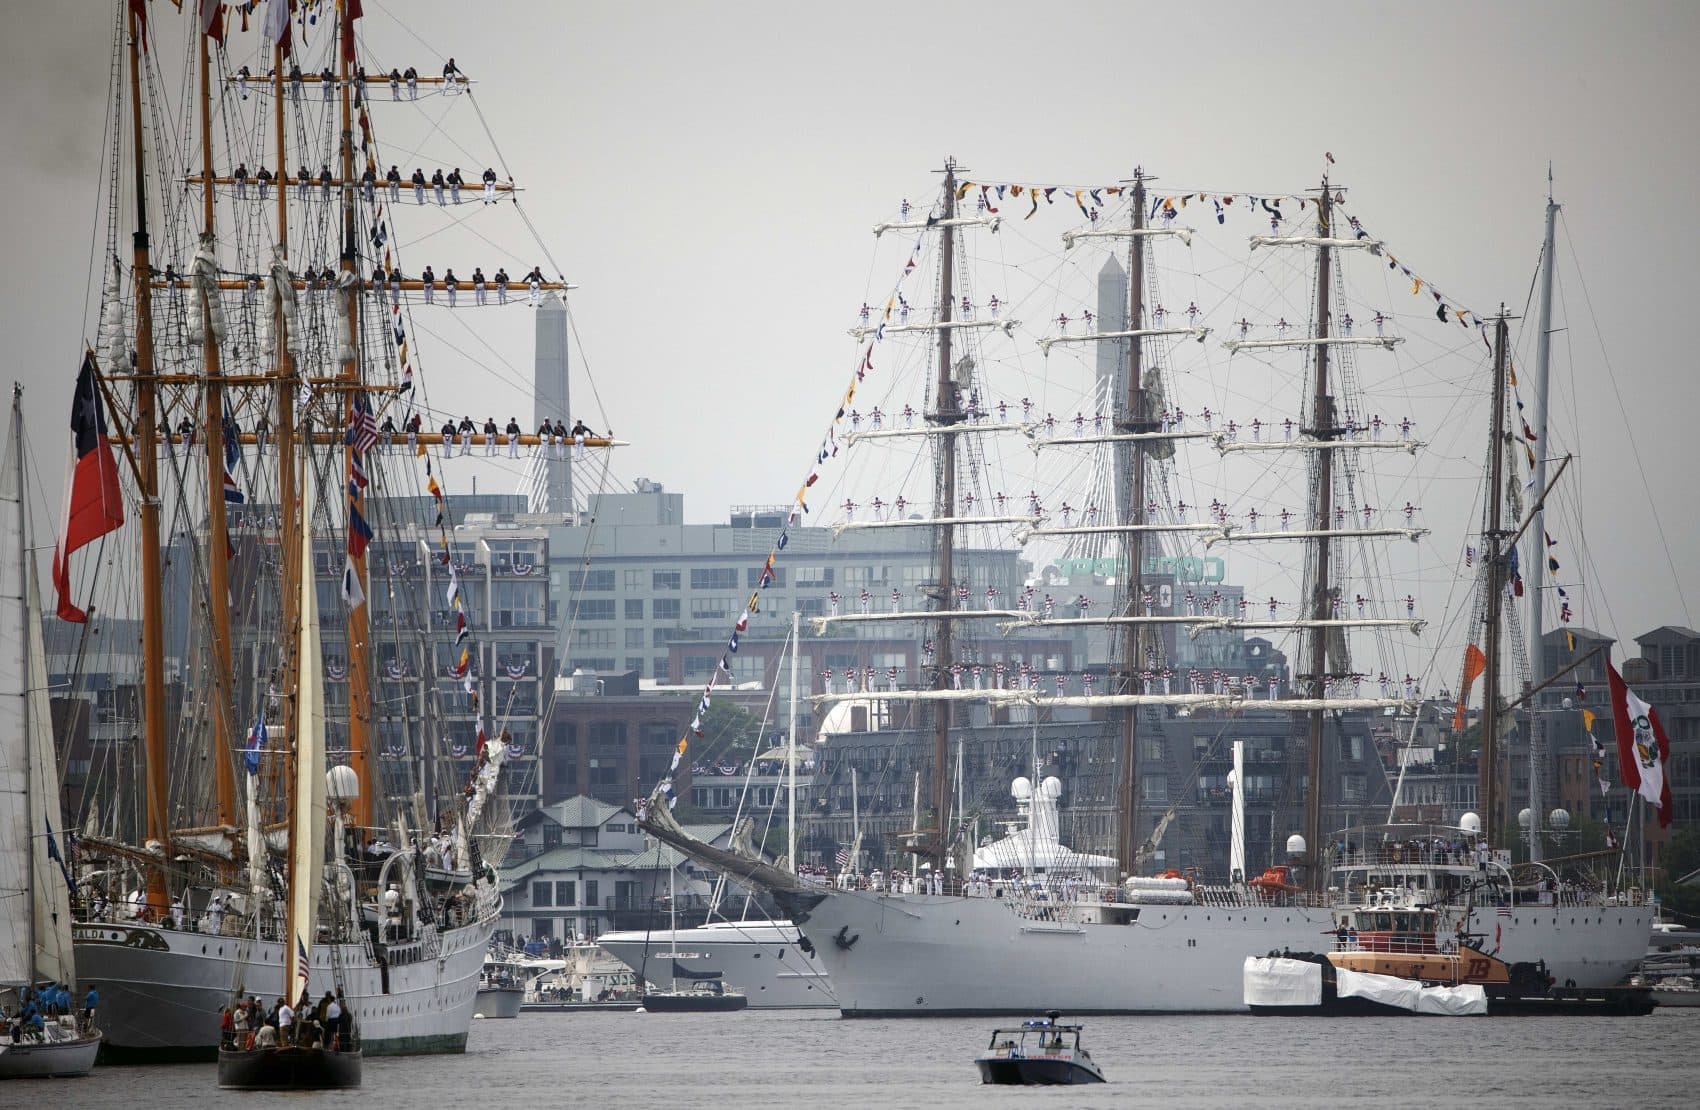 The Peruvian Navy tall ship Union, center, turns around in the inner harbor in front of the Chilean Navy tall ship Esmerelda, left, during Sail Boston's Parade of Sail. (Michael Dwyer/AP)